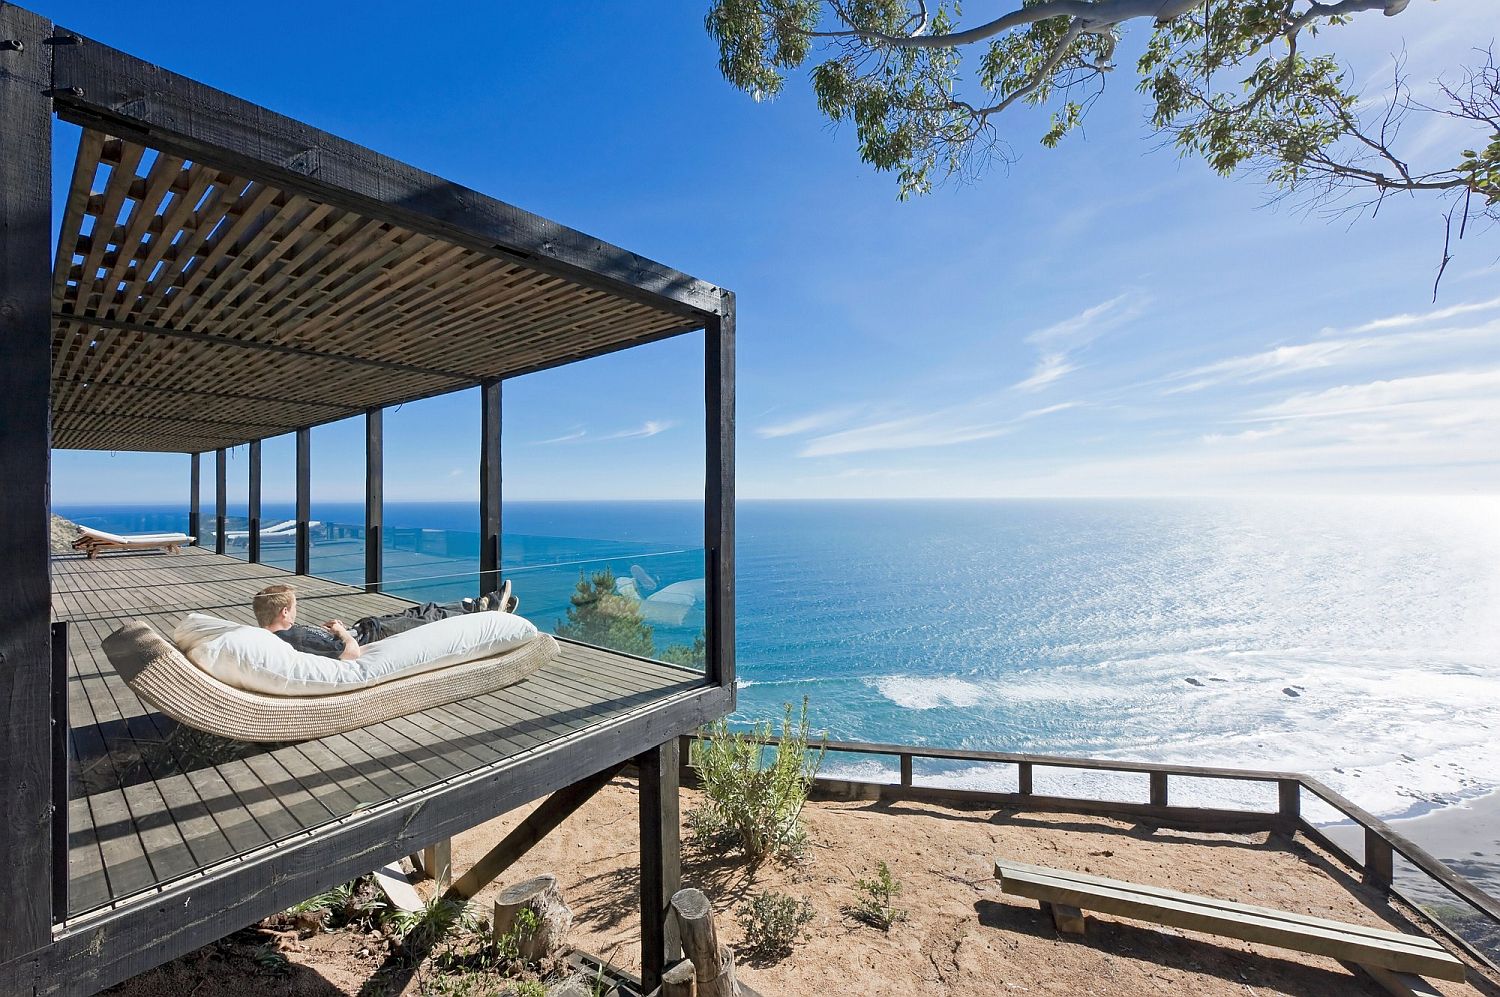 Deck next to the cliff house offers complete privacy even as you enjoy the majestic views